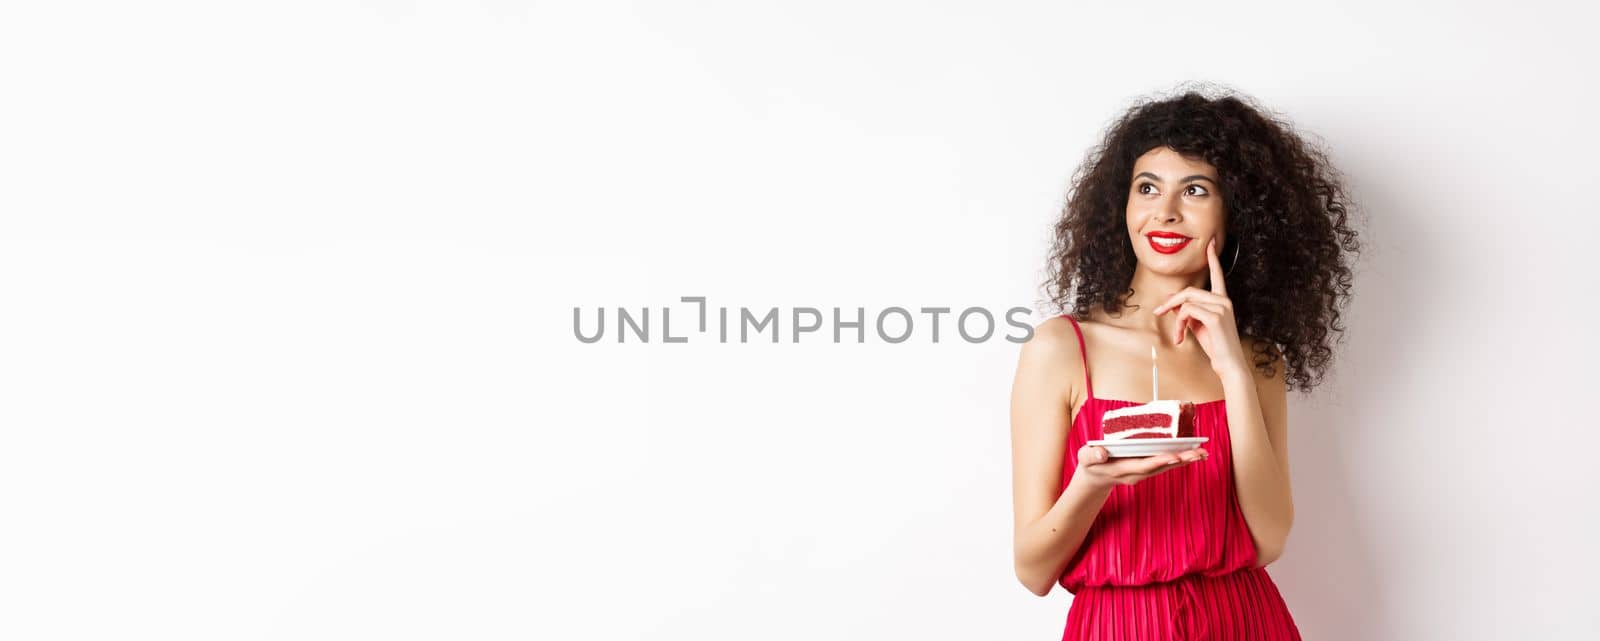 Happy woman celebrating birthday, holding cake and making wish, looking aside dreamy, standing in red dress on white background. Celebration and holiday concept.